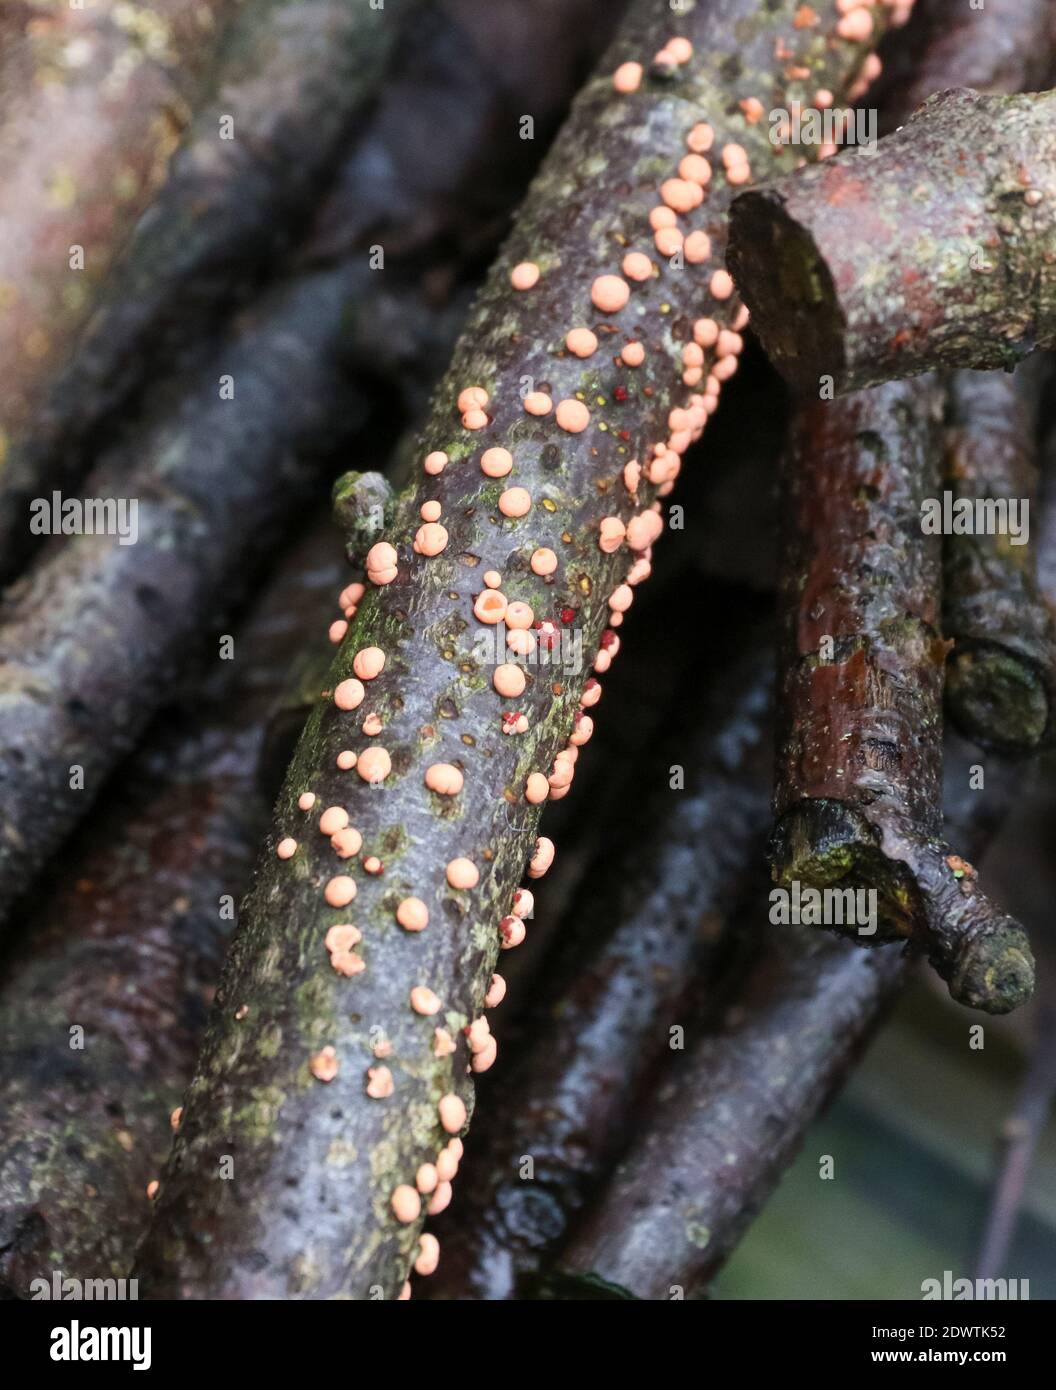 Cut wooden branch displaying nectria cinnabarina - coral spot - a UK tree fungal disease with coral-pink spots or pustules on the branch bark. Stock Photo